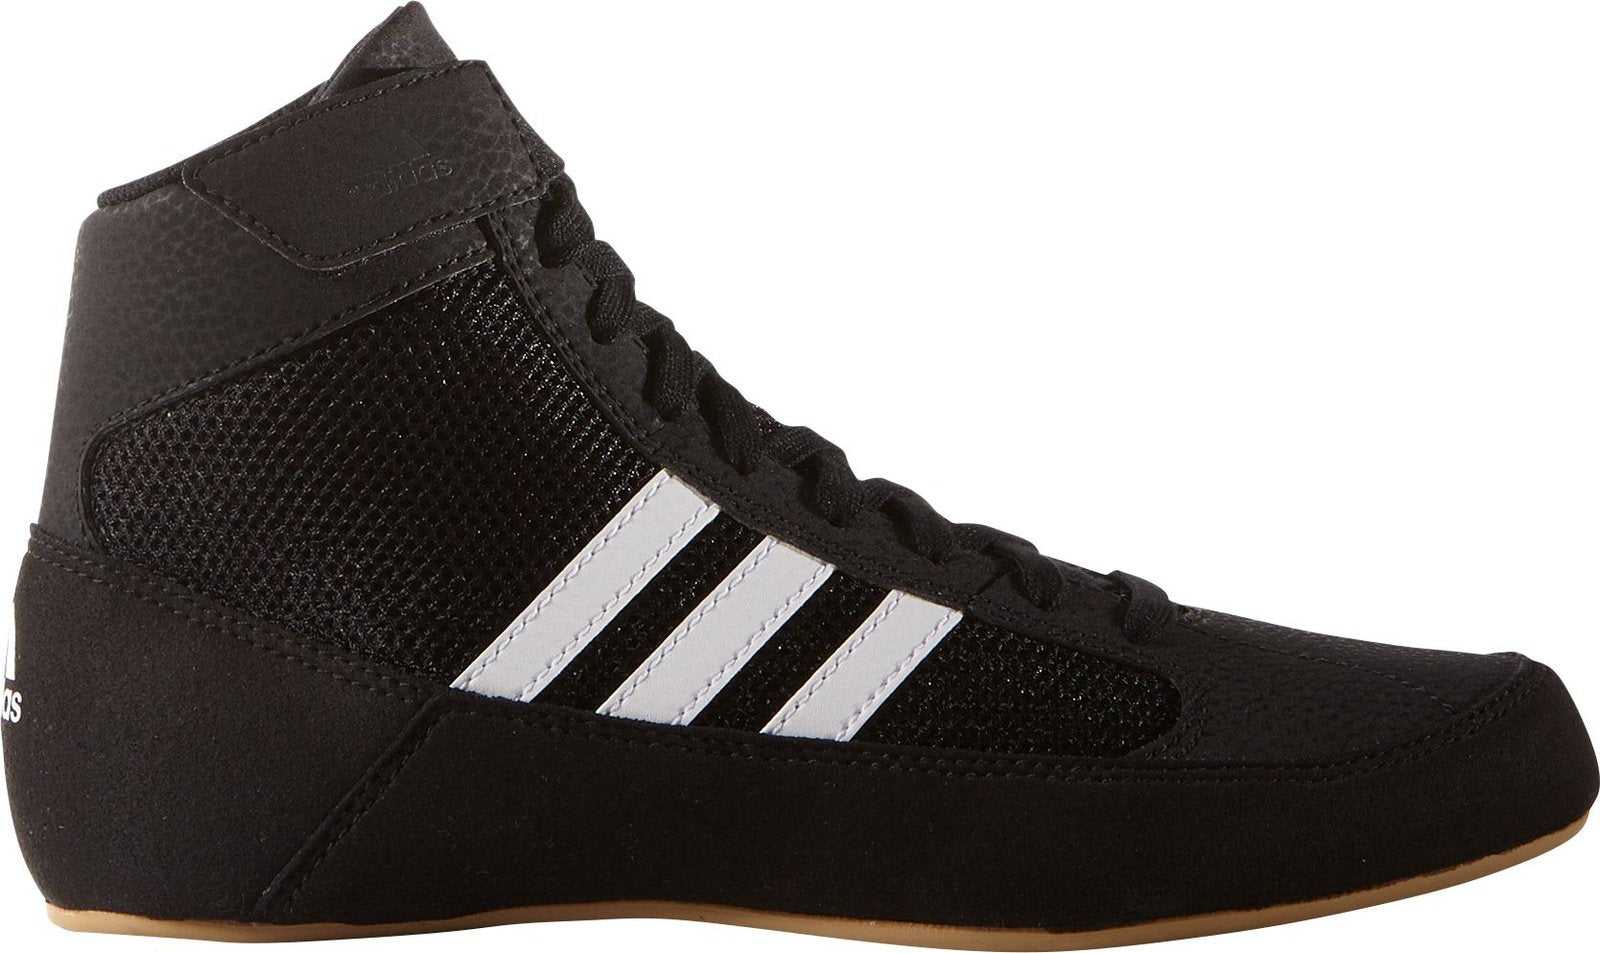 Adidas AQ3327 Youth HVC Wrestling Shoe - Black White - HIT a Double